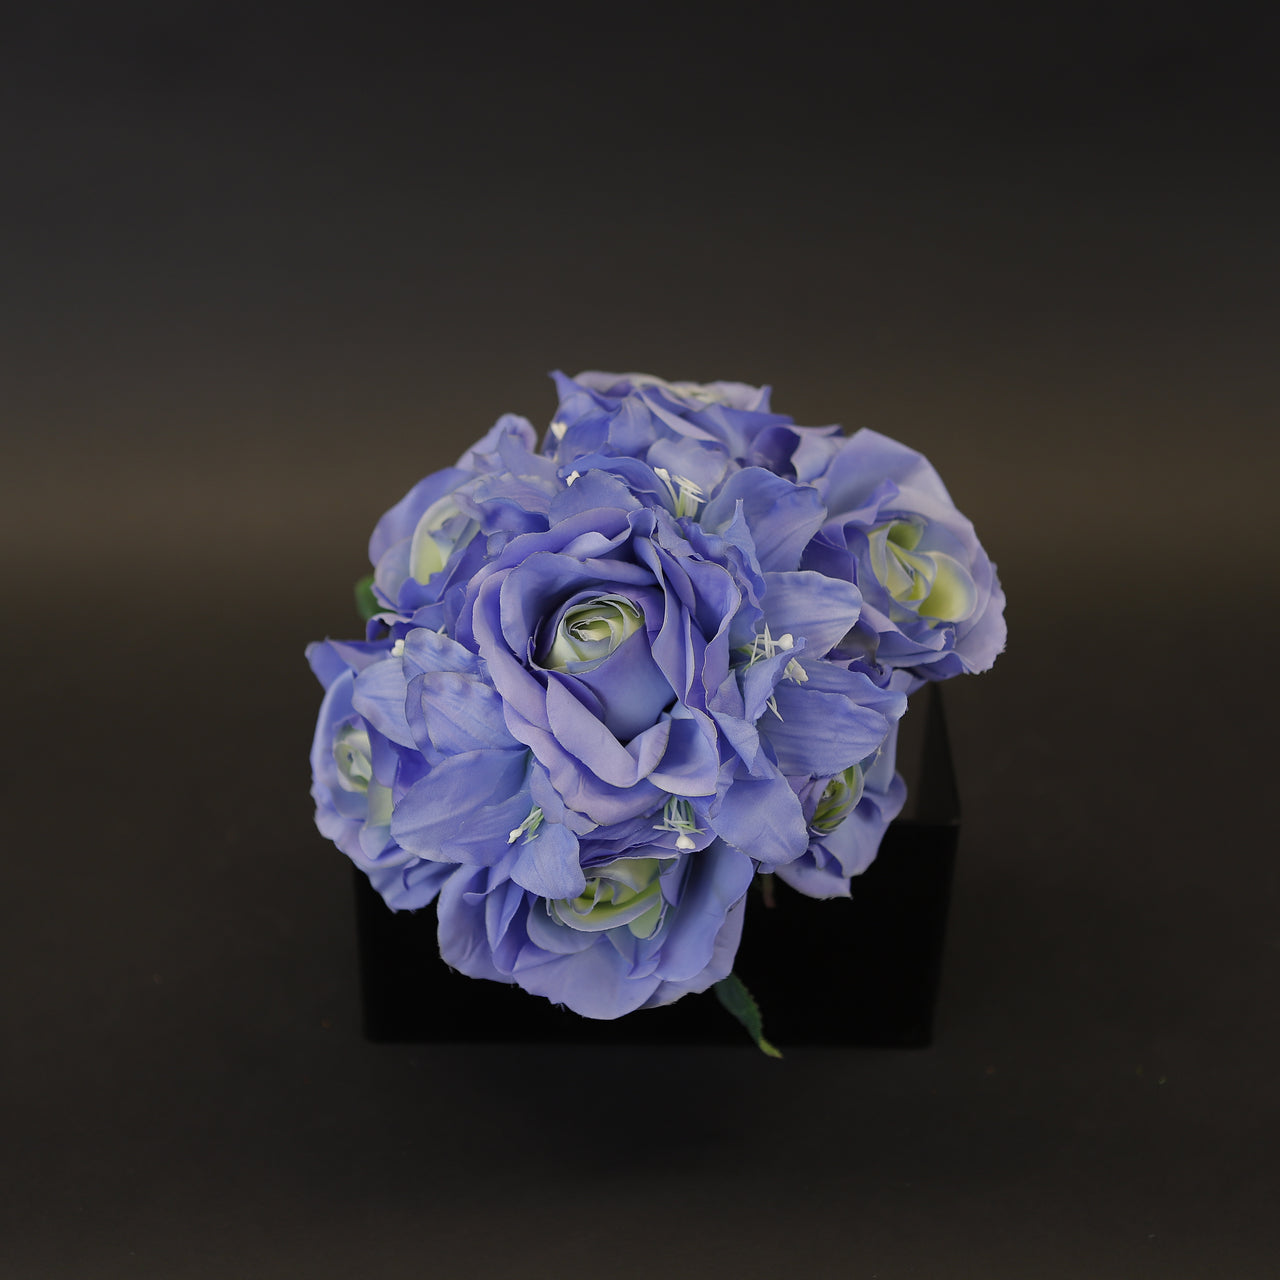 HCFL8040 - Frilly Periwinkle Rose Bouquet